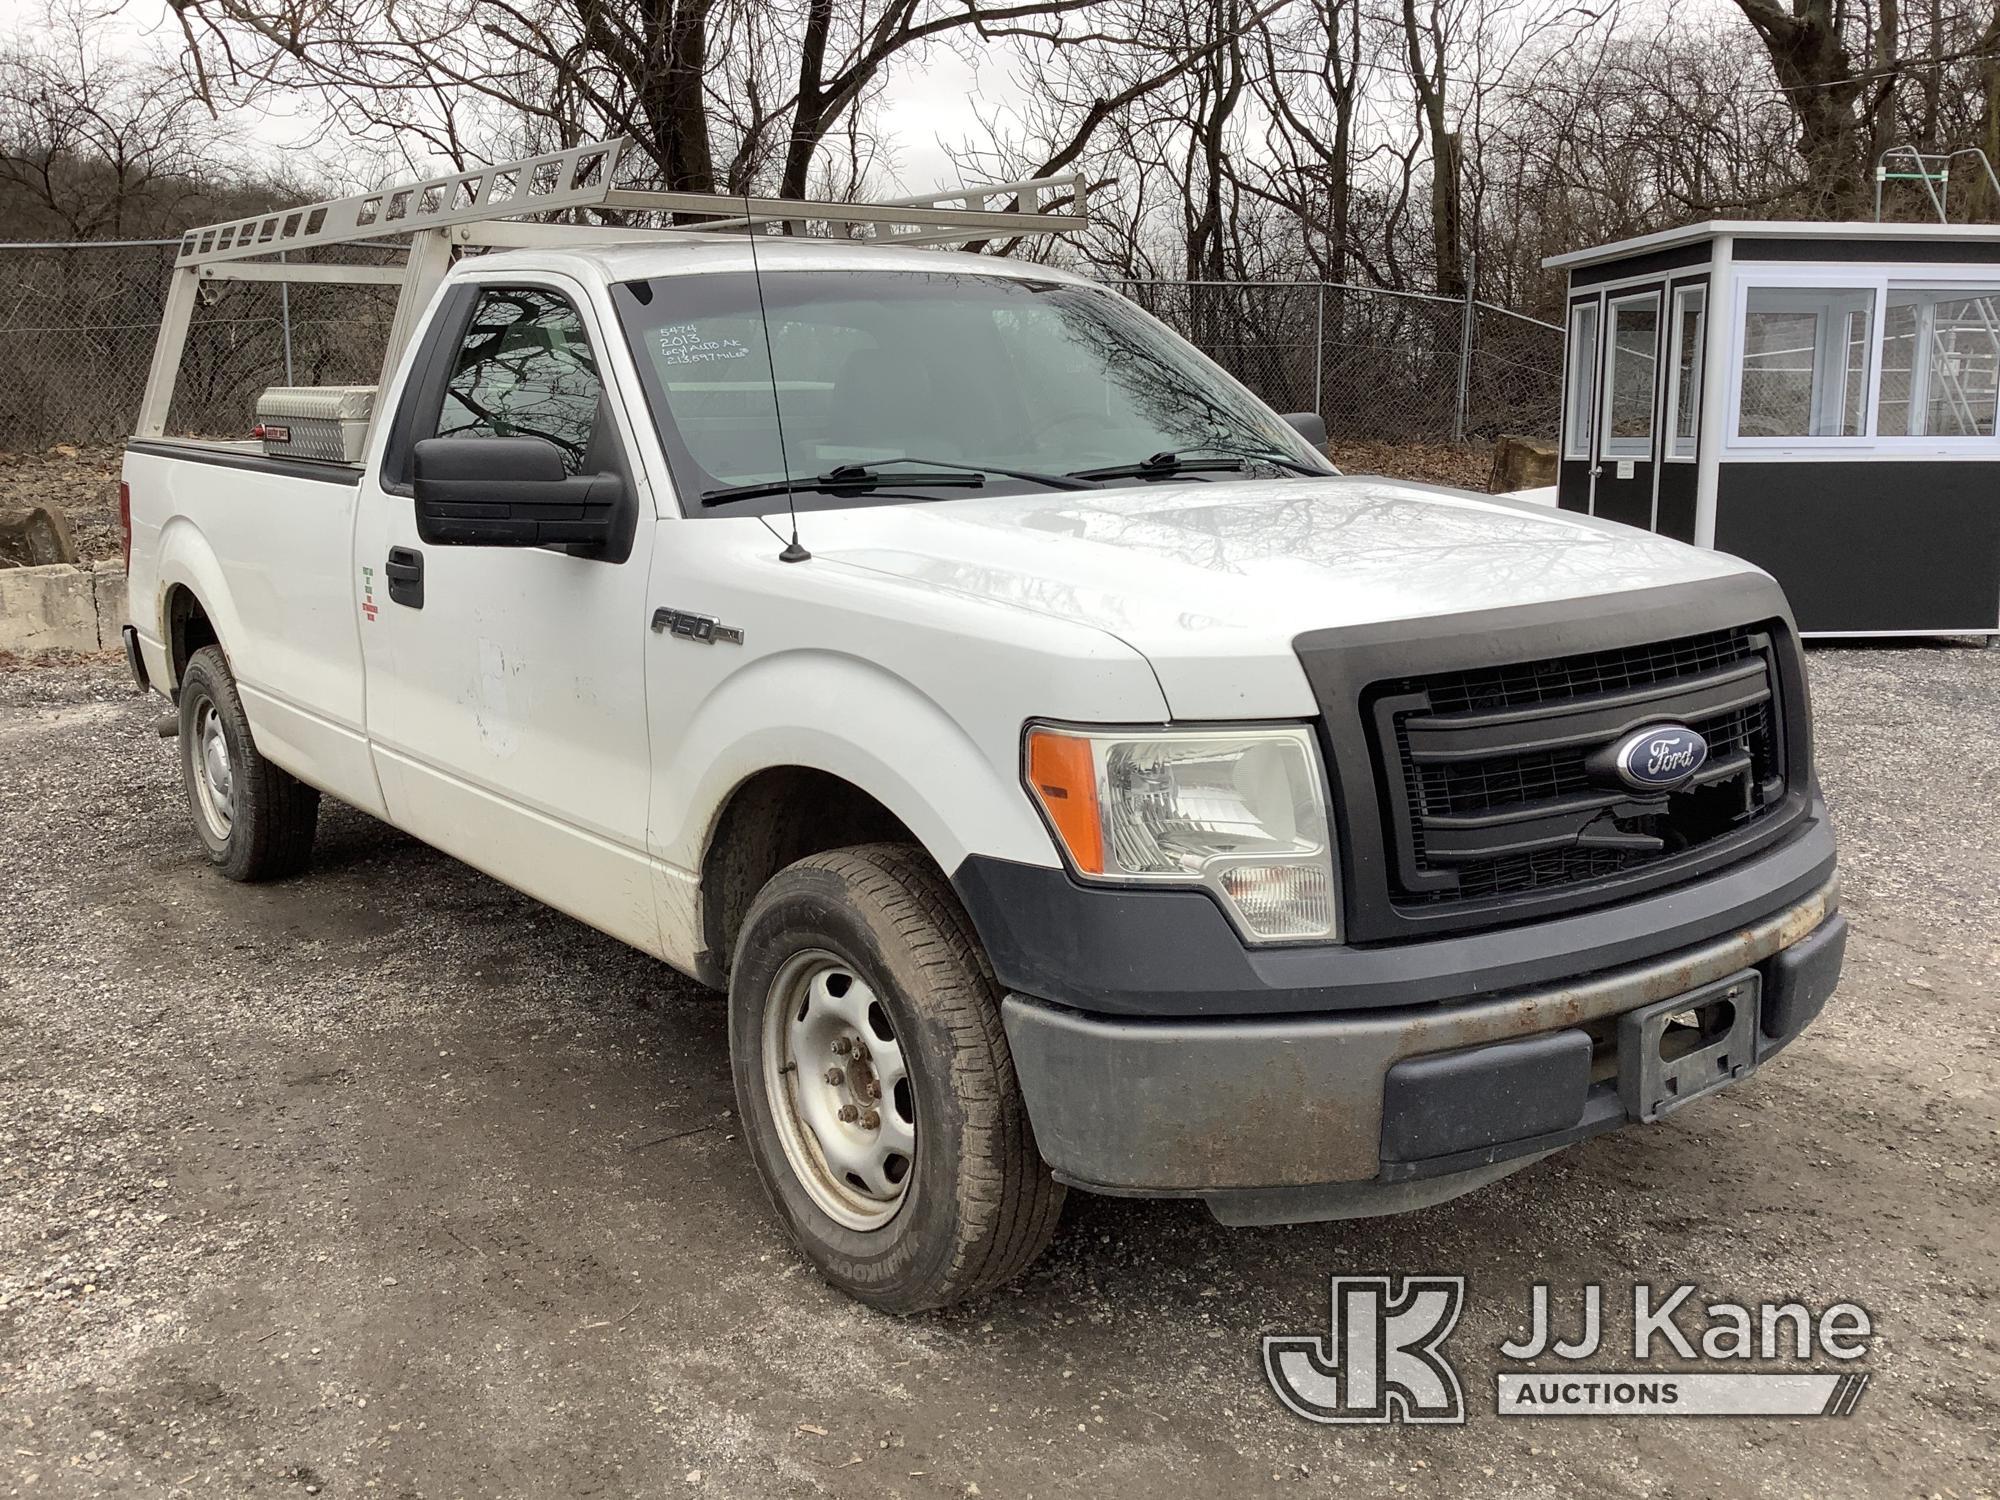 (Plymouth Meeting, PA) 2013 Ford F150 Pickup Truck Runs & Moves, Body & Rust Damage